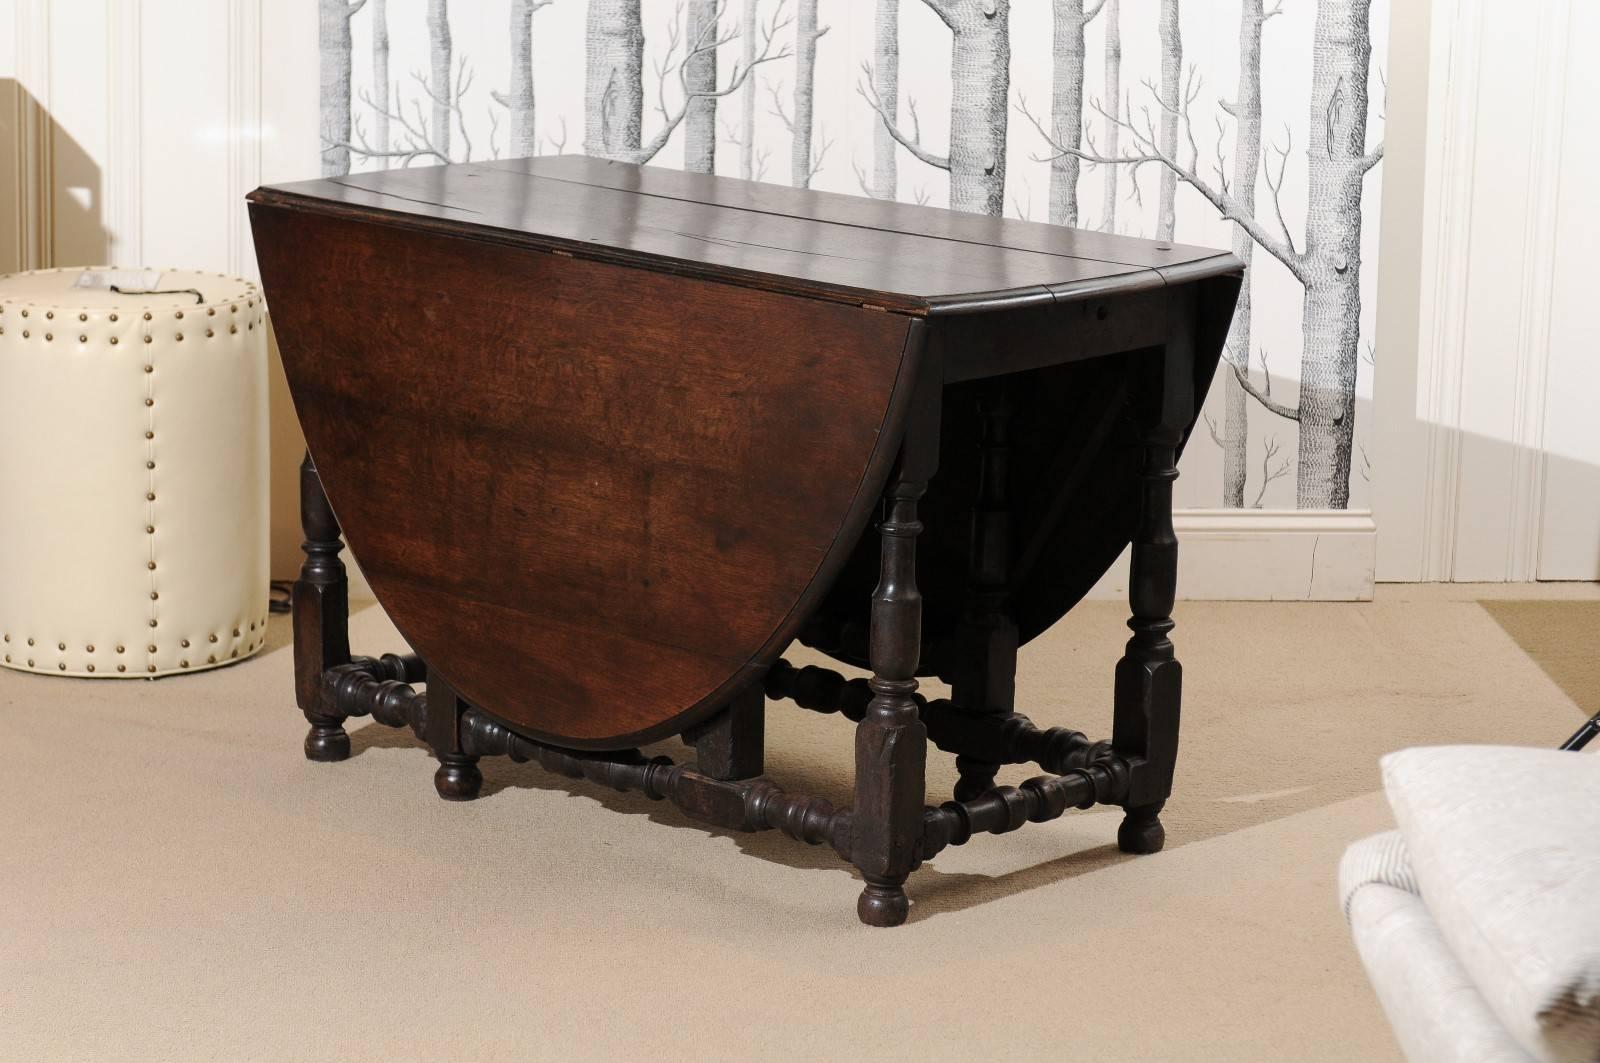 English gate leg table with carved legs and dark finish.